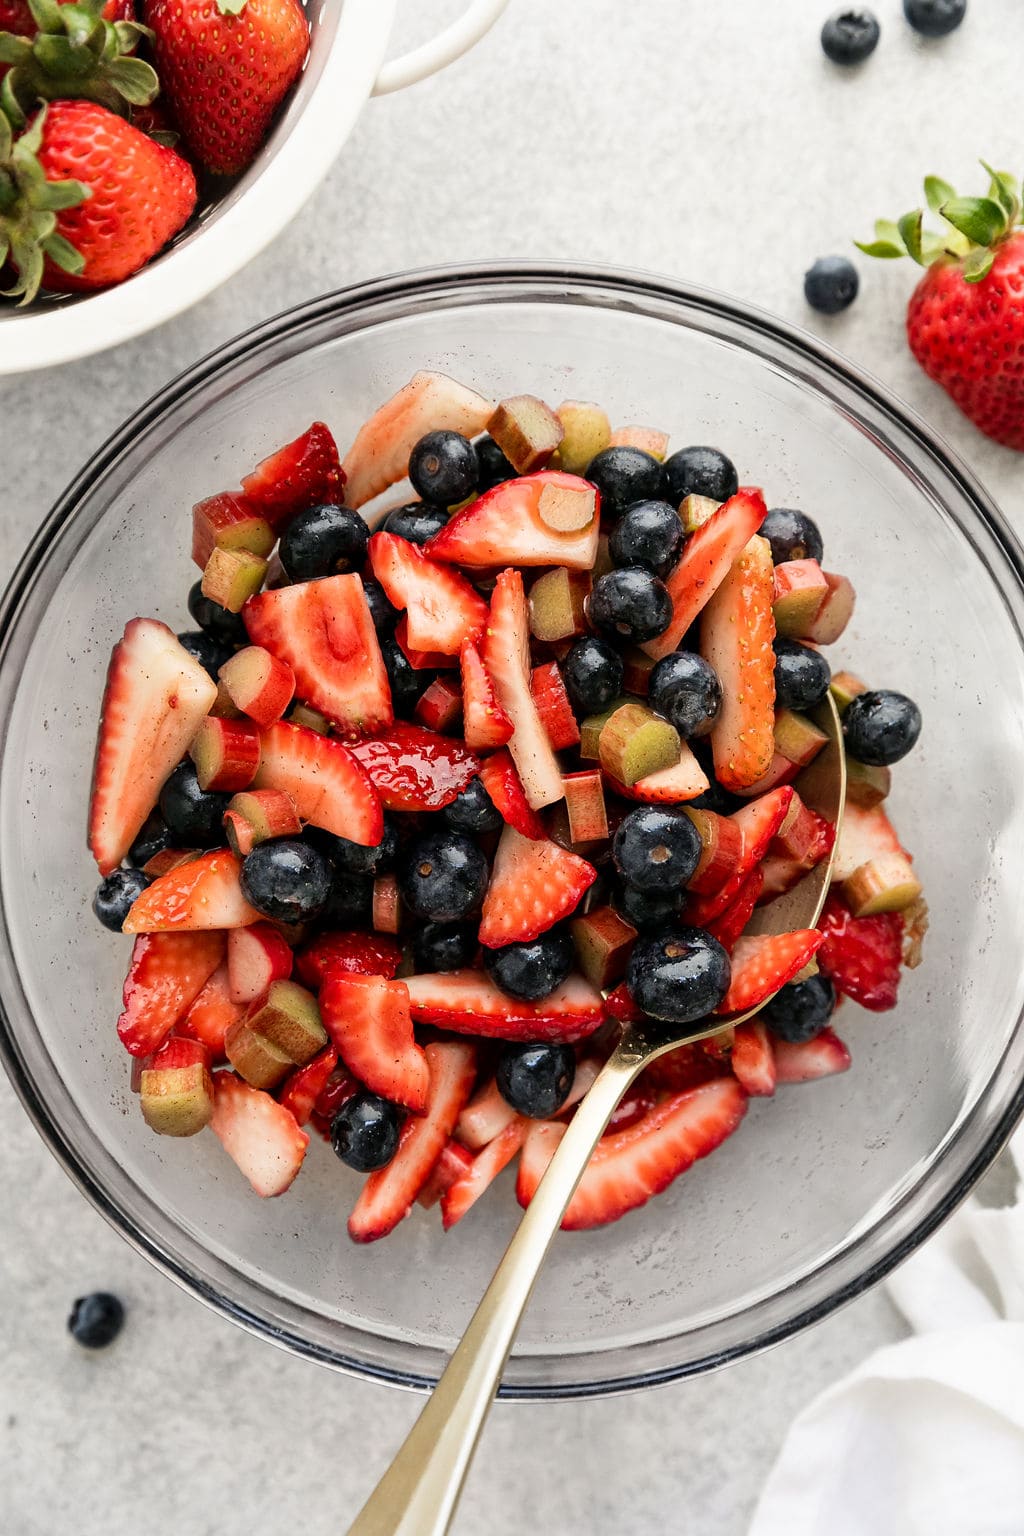 Galette filling of fresh sliced strawberries, blueberries, and rhubarb in clear glass mixing bowl.